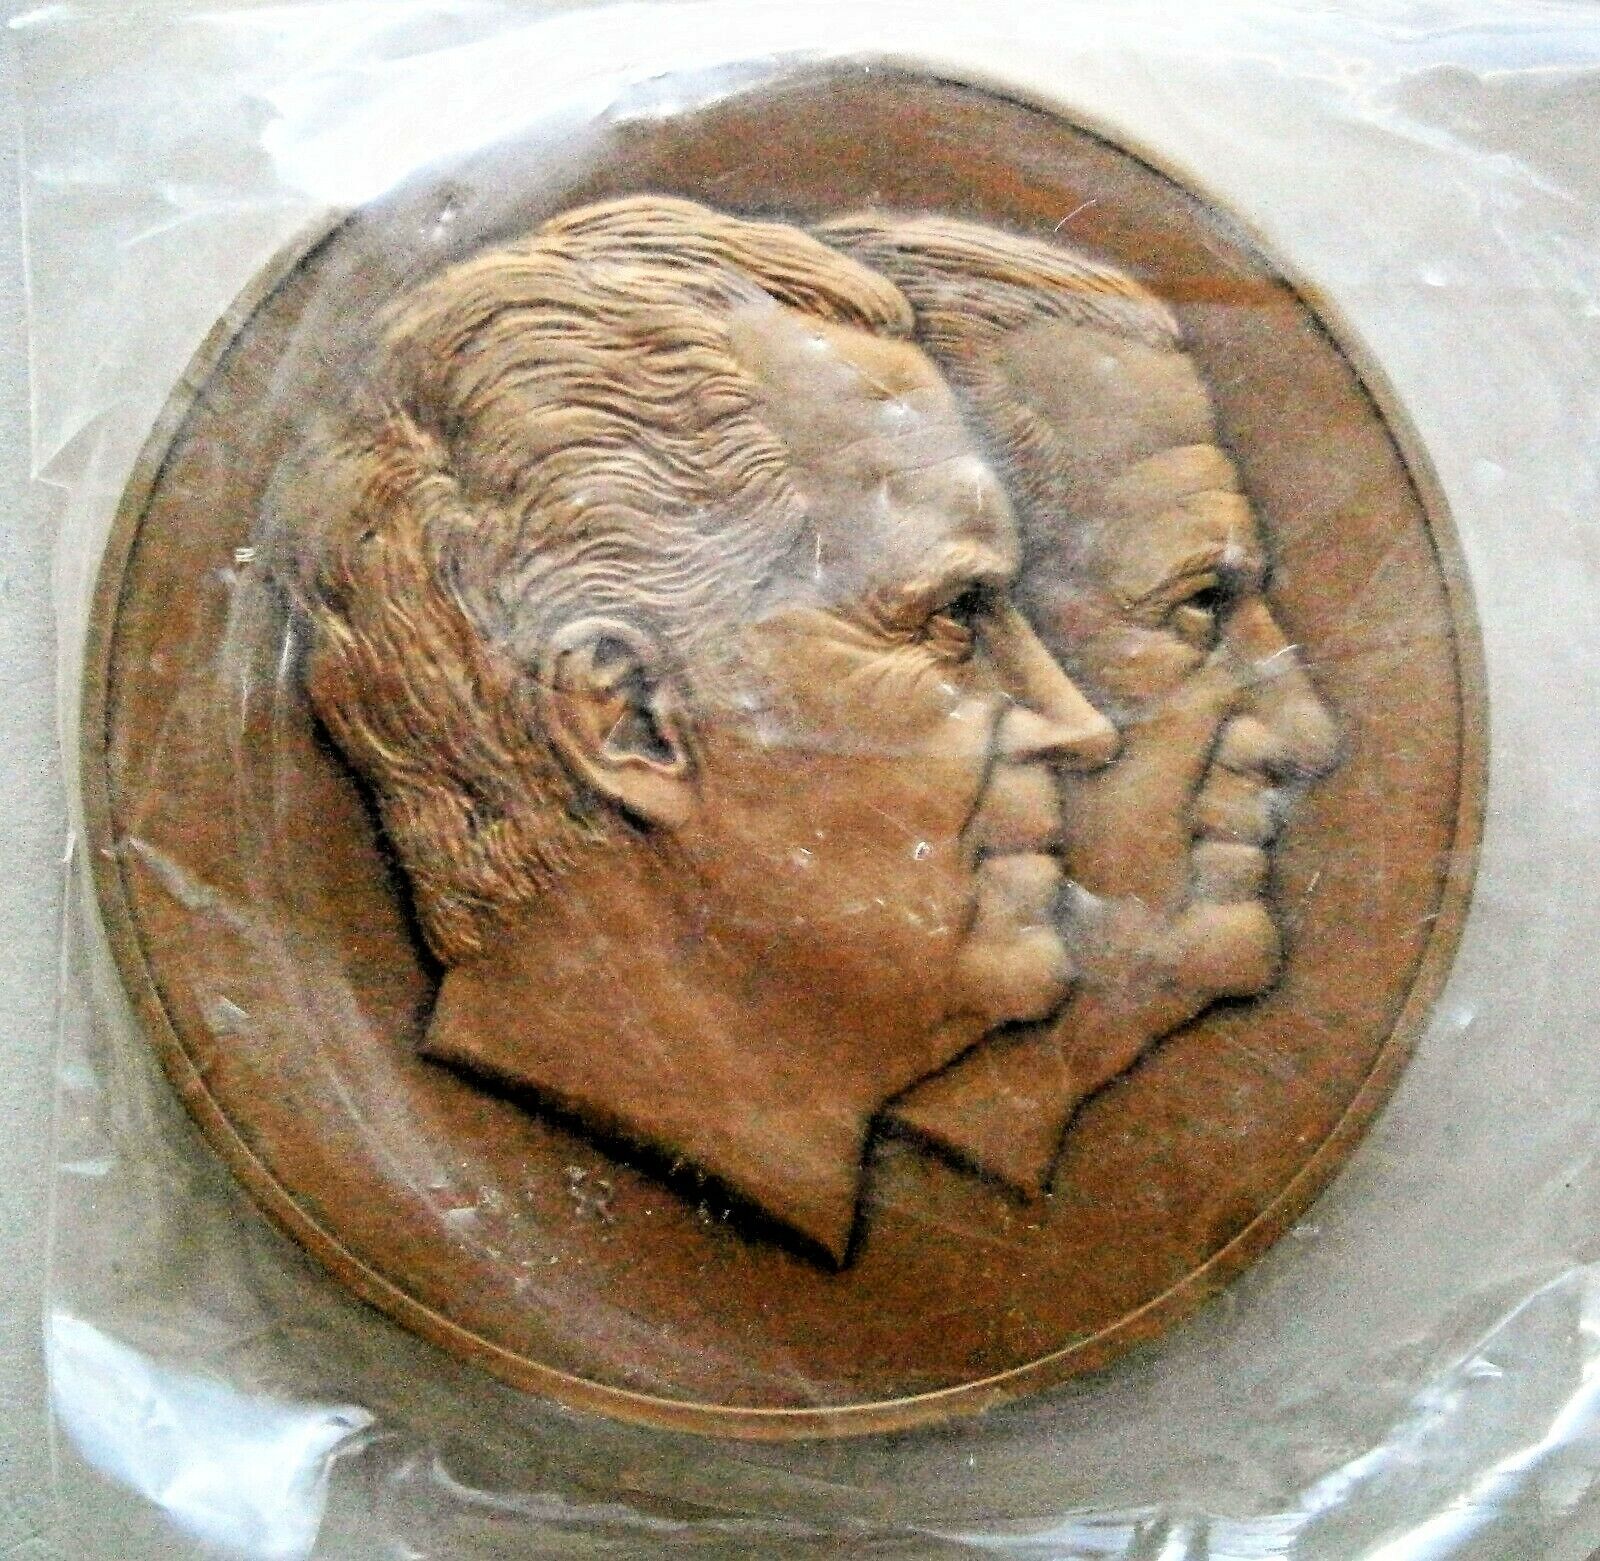 Official 1973 Nixon/Agnew Inaugural Medal sculpted by Gilroy Roberts 